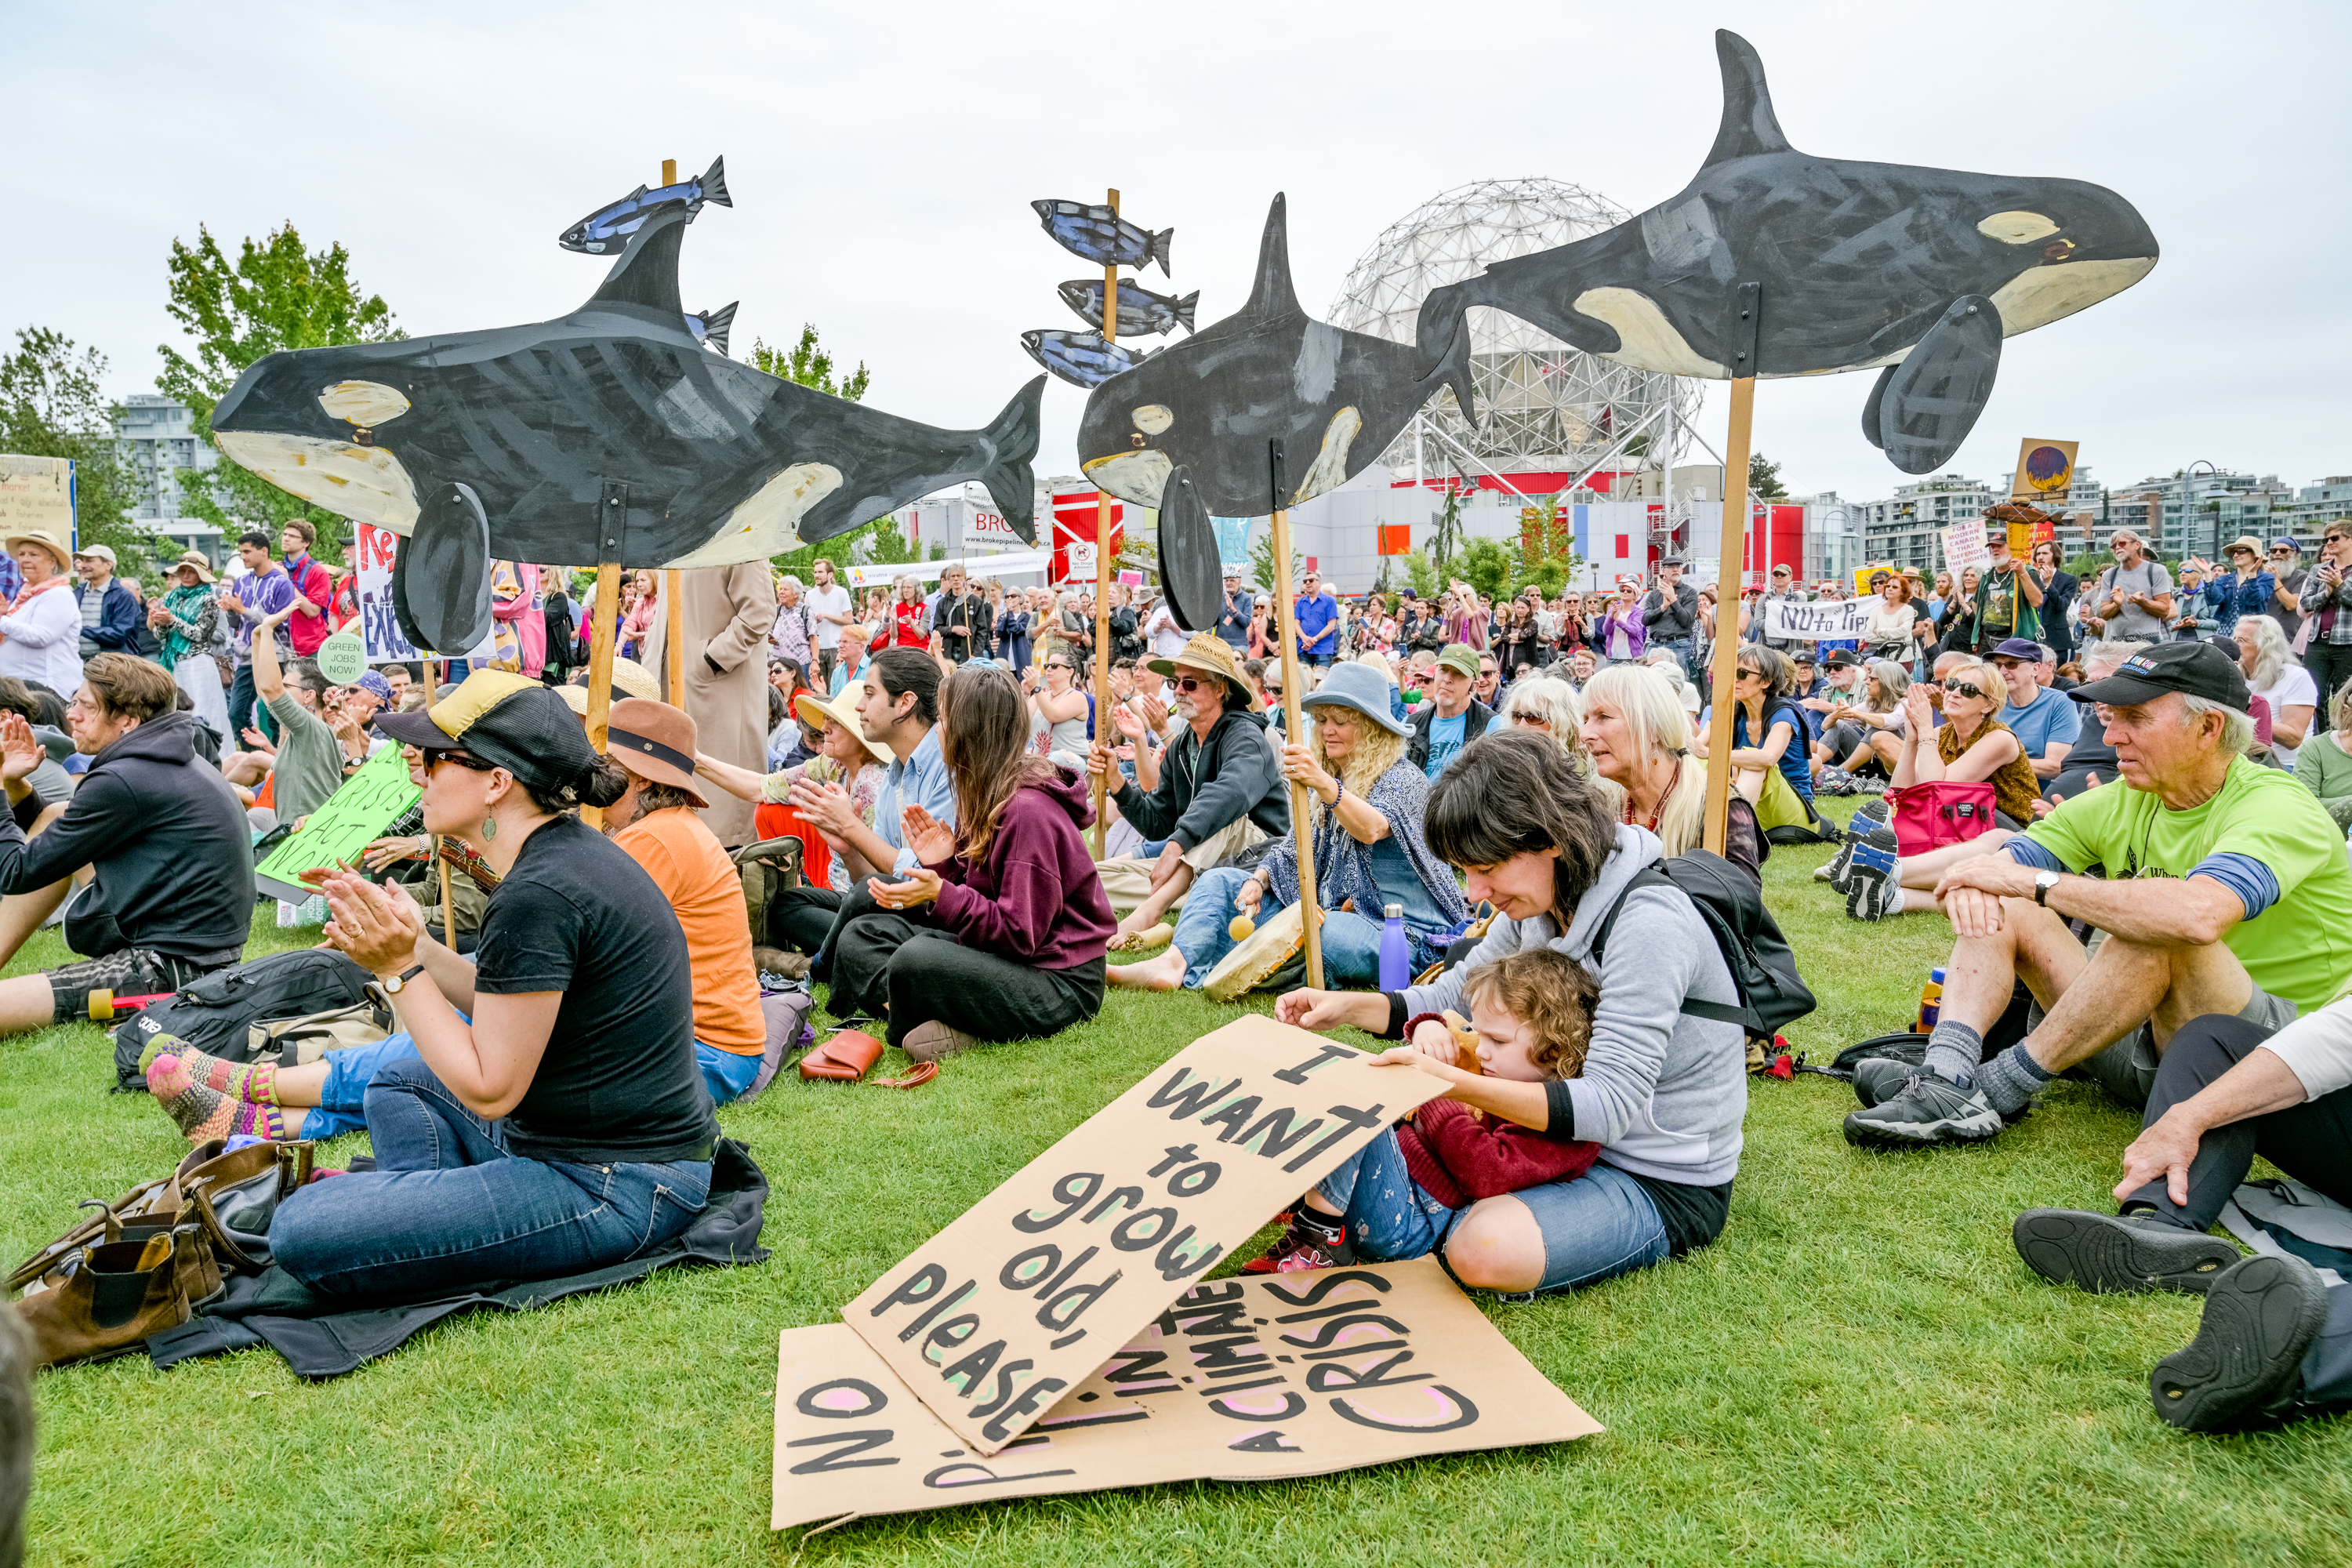 People sit on a grassy area with art and signs during a climate justice rally.